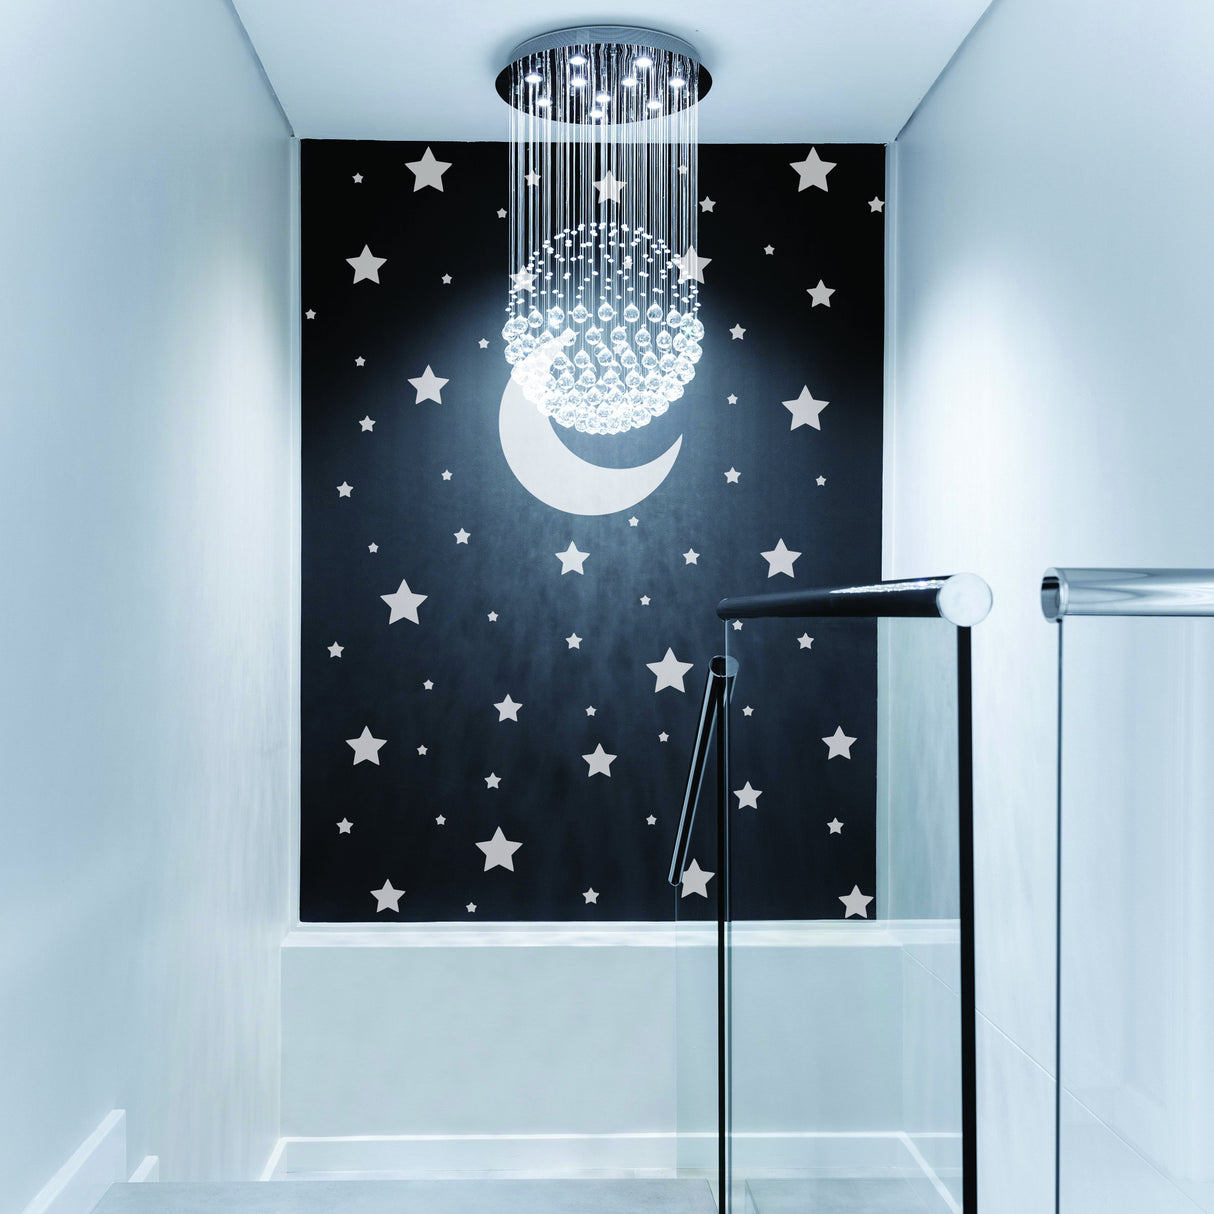 233x White Stars Wall Vinyl Stickers - Little Peel And Stick Art Map Die Cut Ceiling Decal